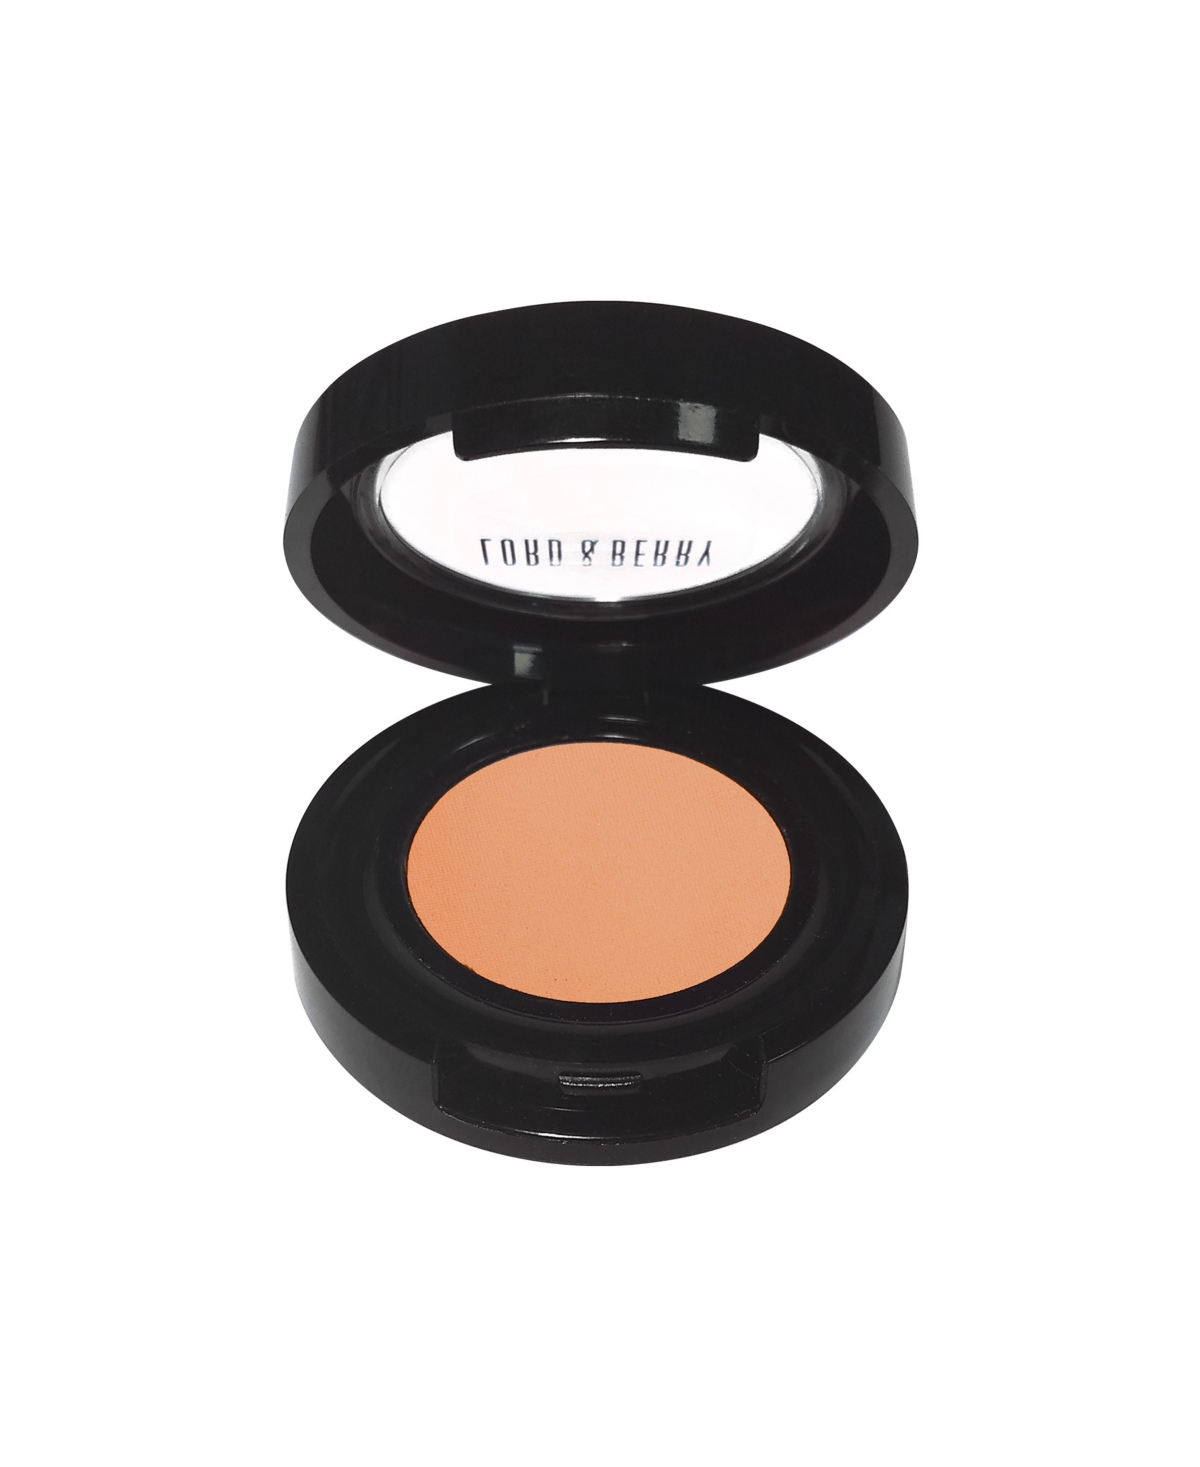 Lord & Berry Flawless Concealer, 0.07 oz In Natural Tan